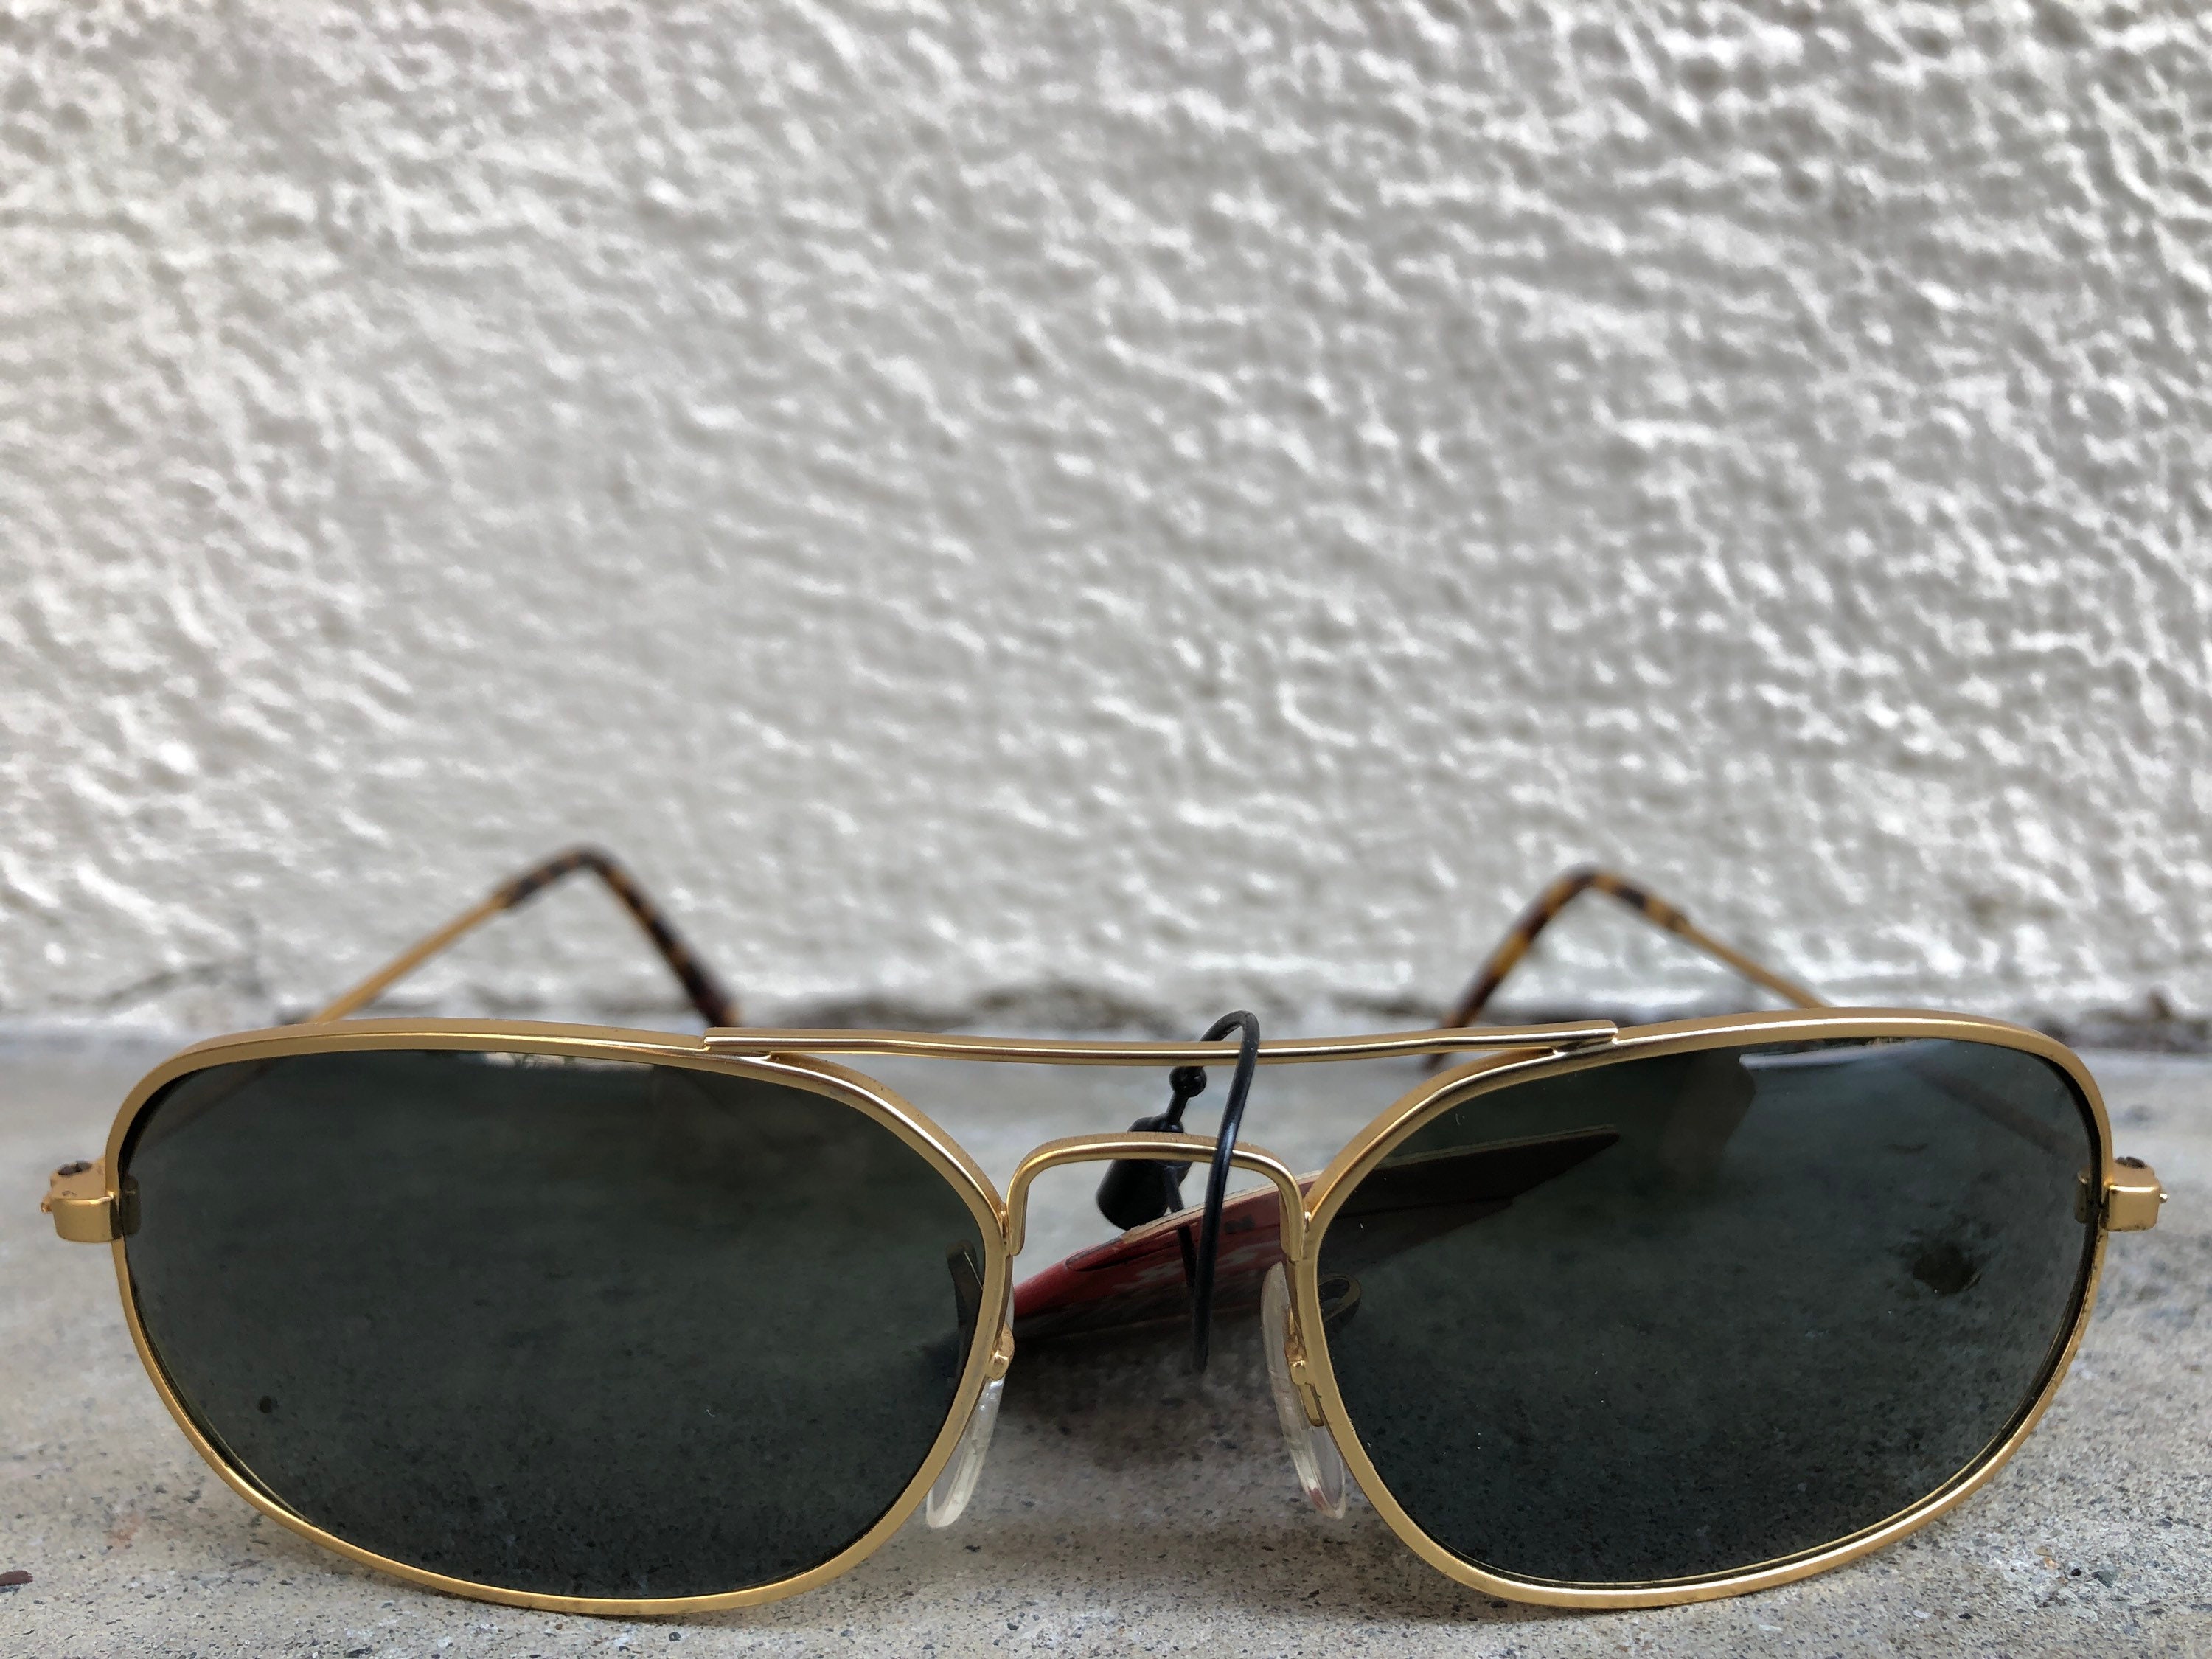 NWT! Black Chanel Square Sunglasses With Polarized Lenses for Sale